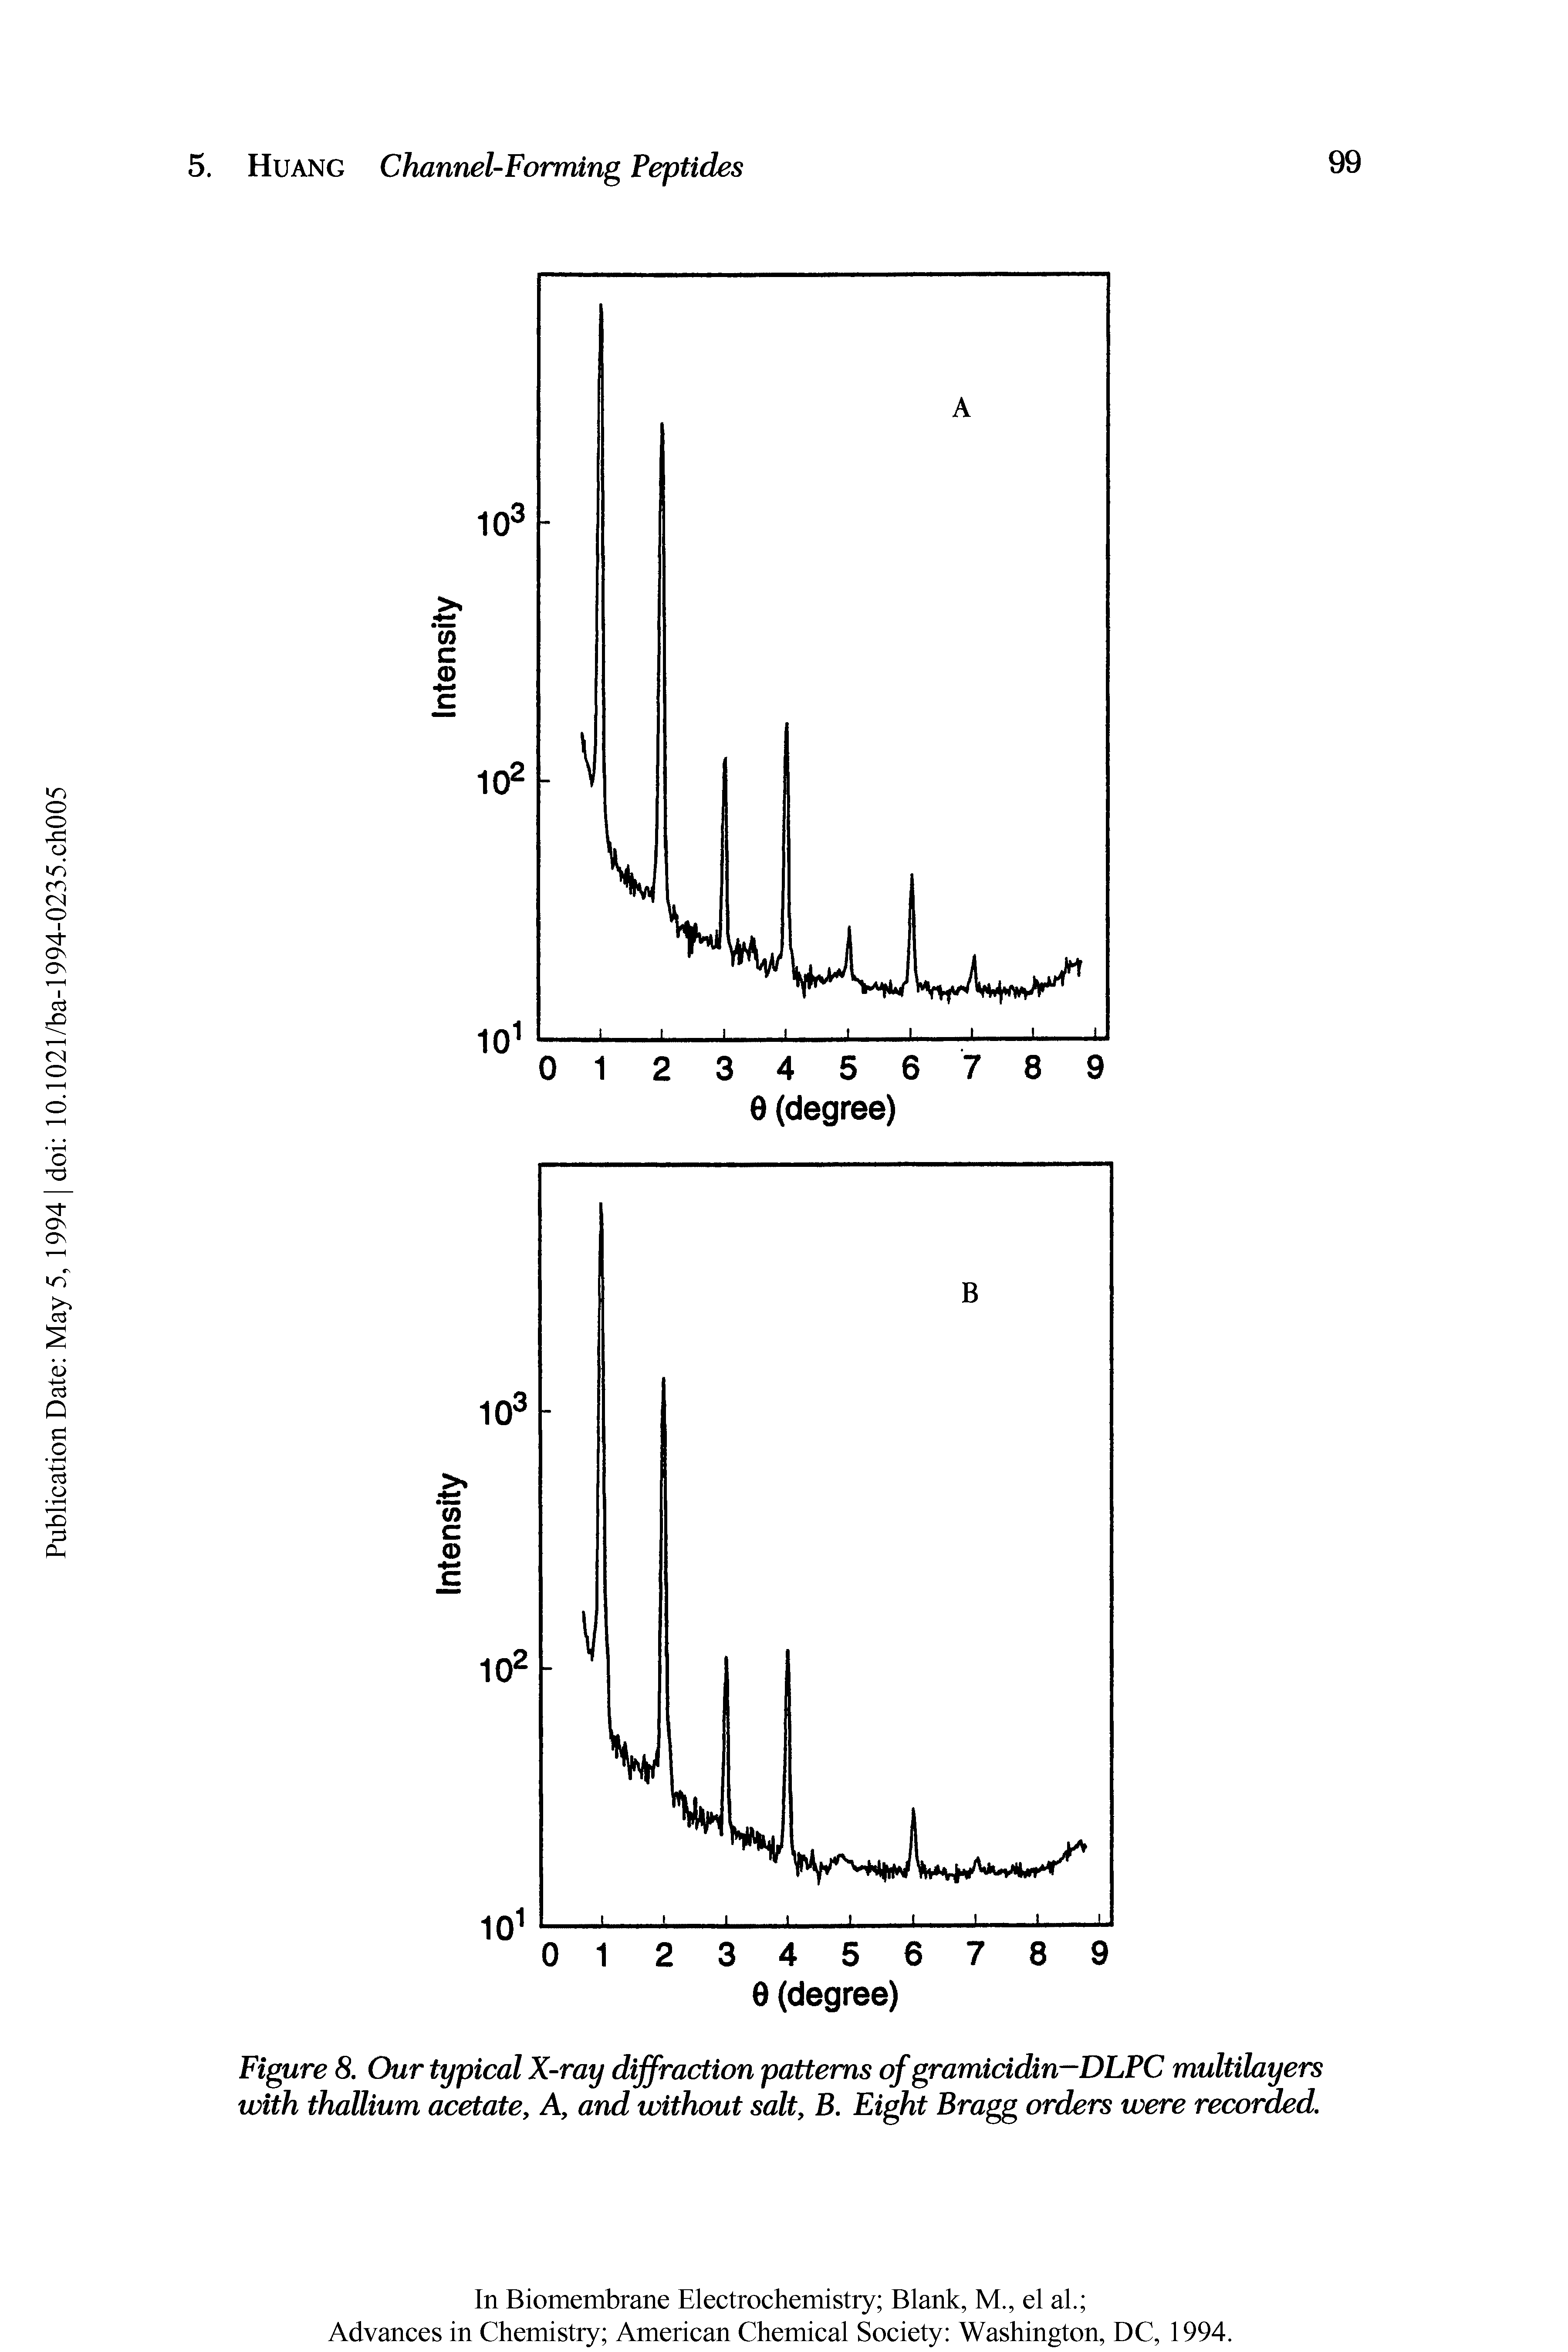 Figure 8. Our typical X-ray diffraction patterns of gramicidin—DLPC multilayers with thallium acetate, A, and without salt, B. Eight Bragg orders were recorded.